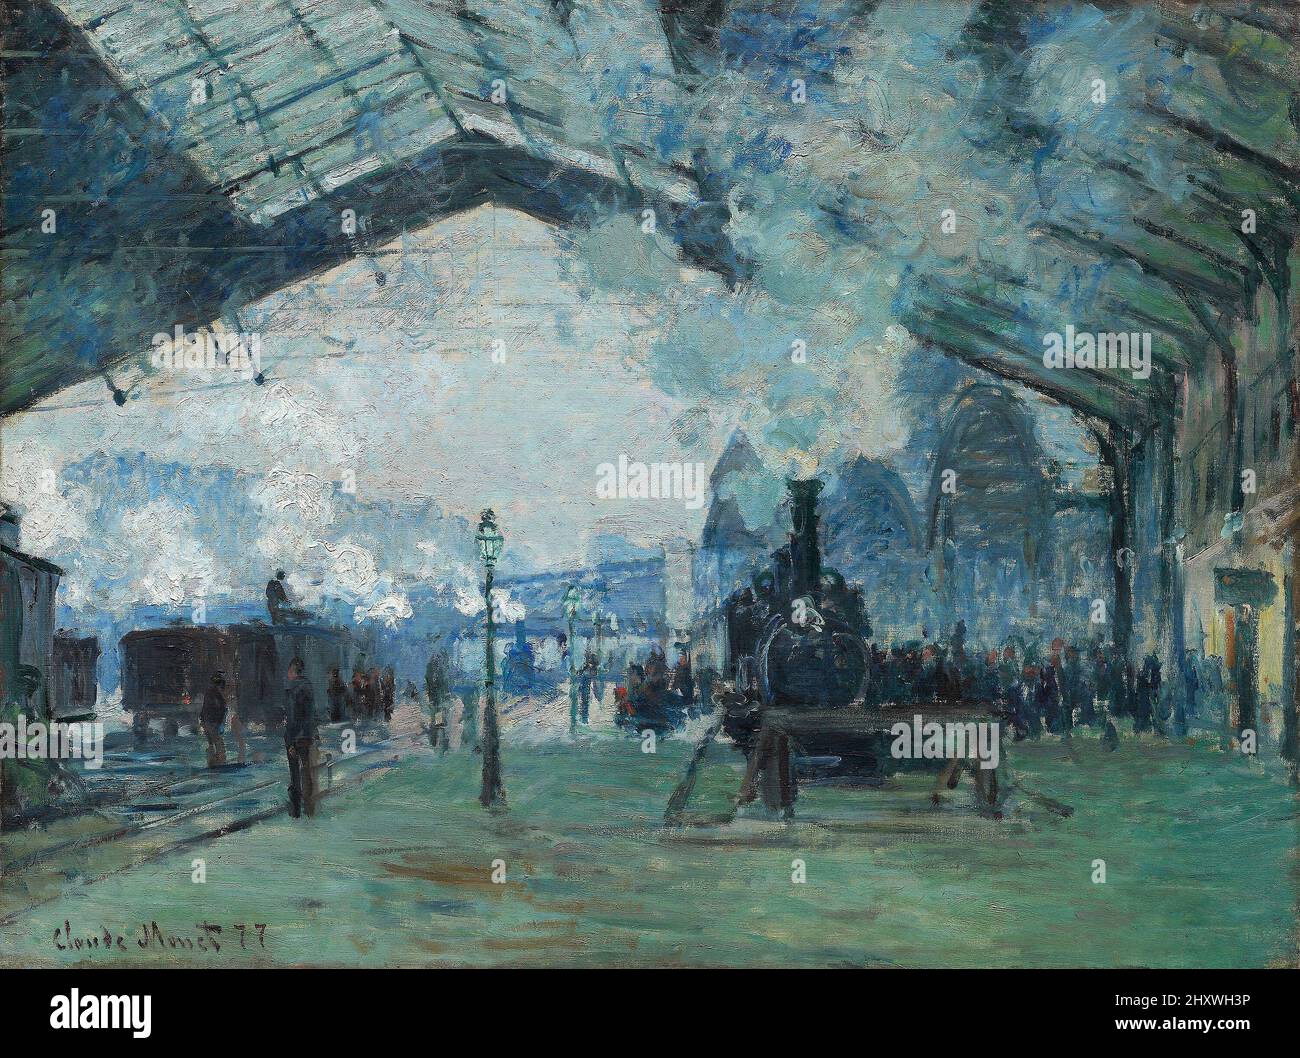 Arrival of the Normandy Train, Gare Saint-Lazare in Paris, is a c. 1877 painting by Claude Monet Stock Photo